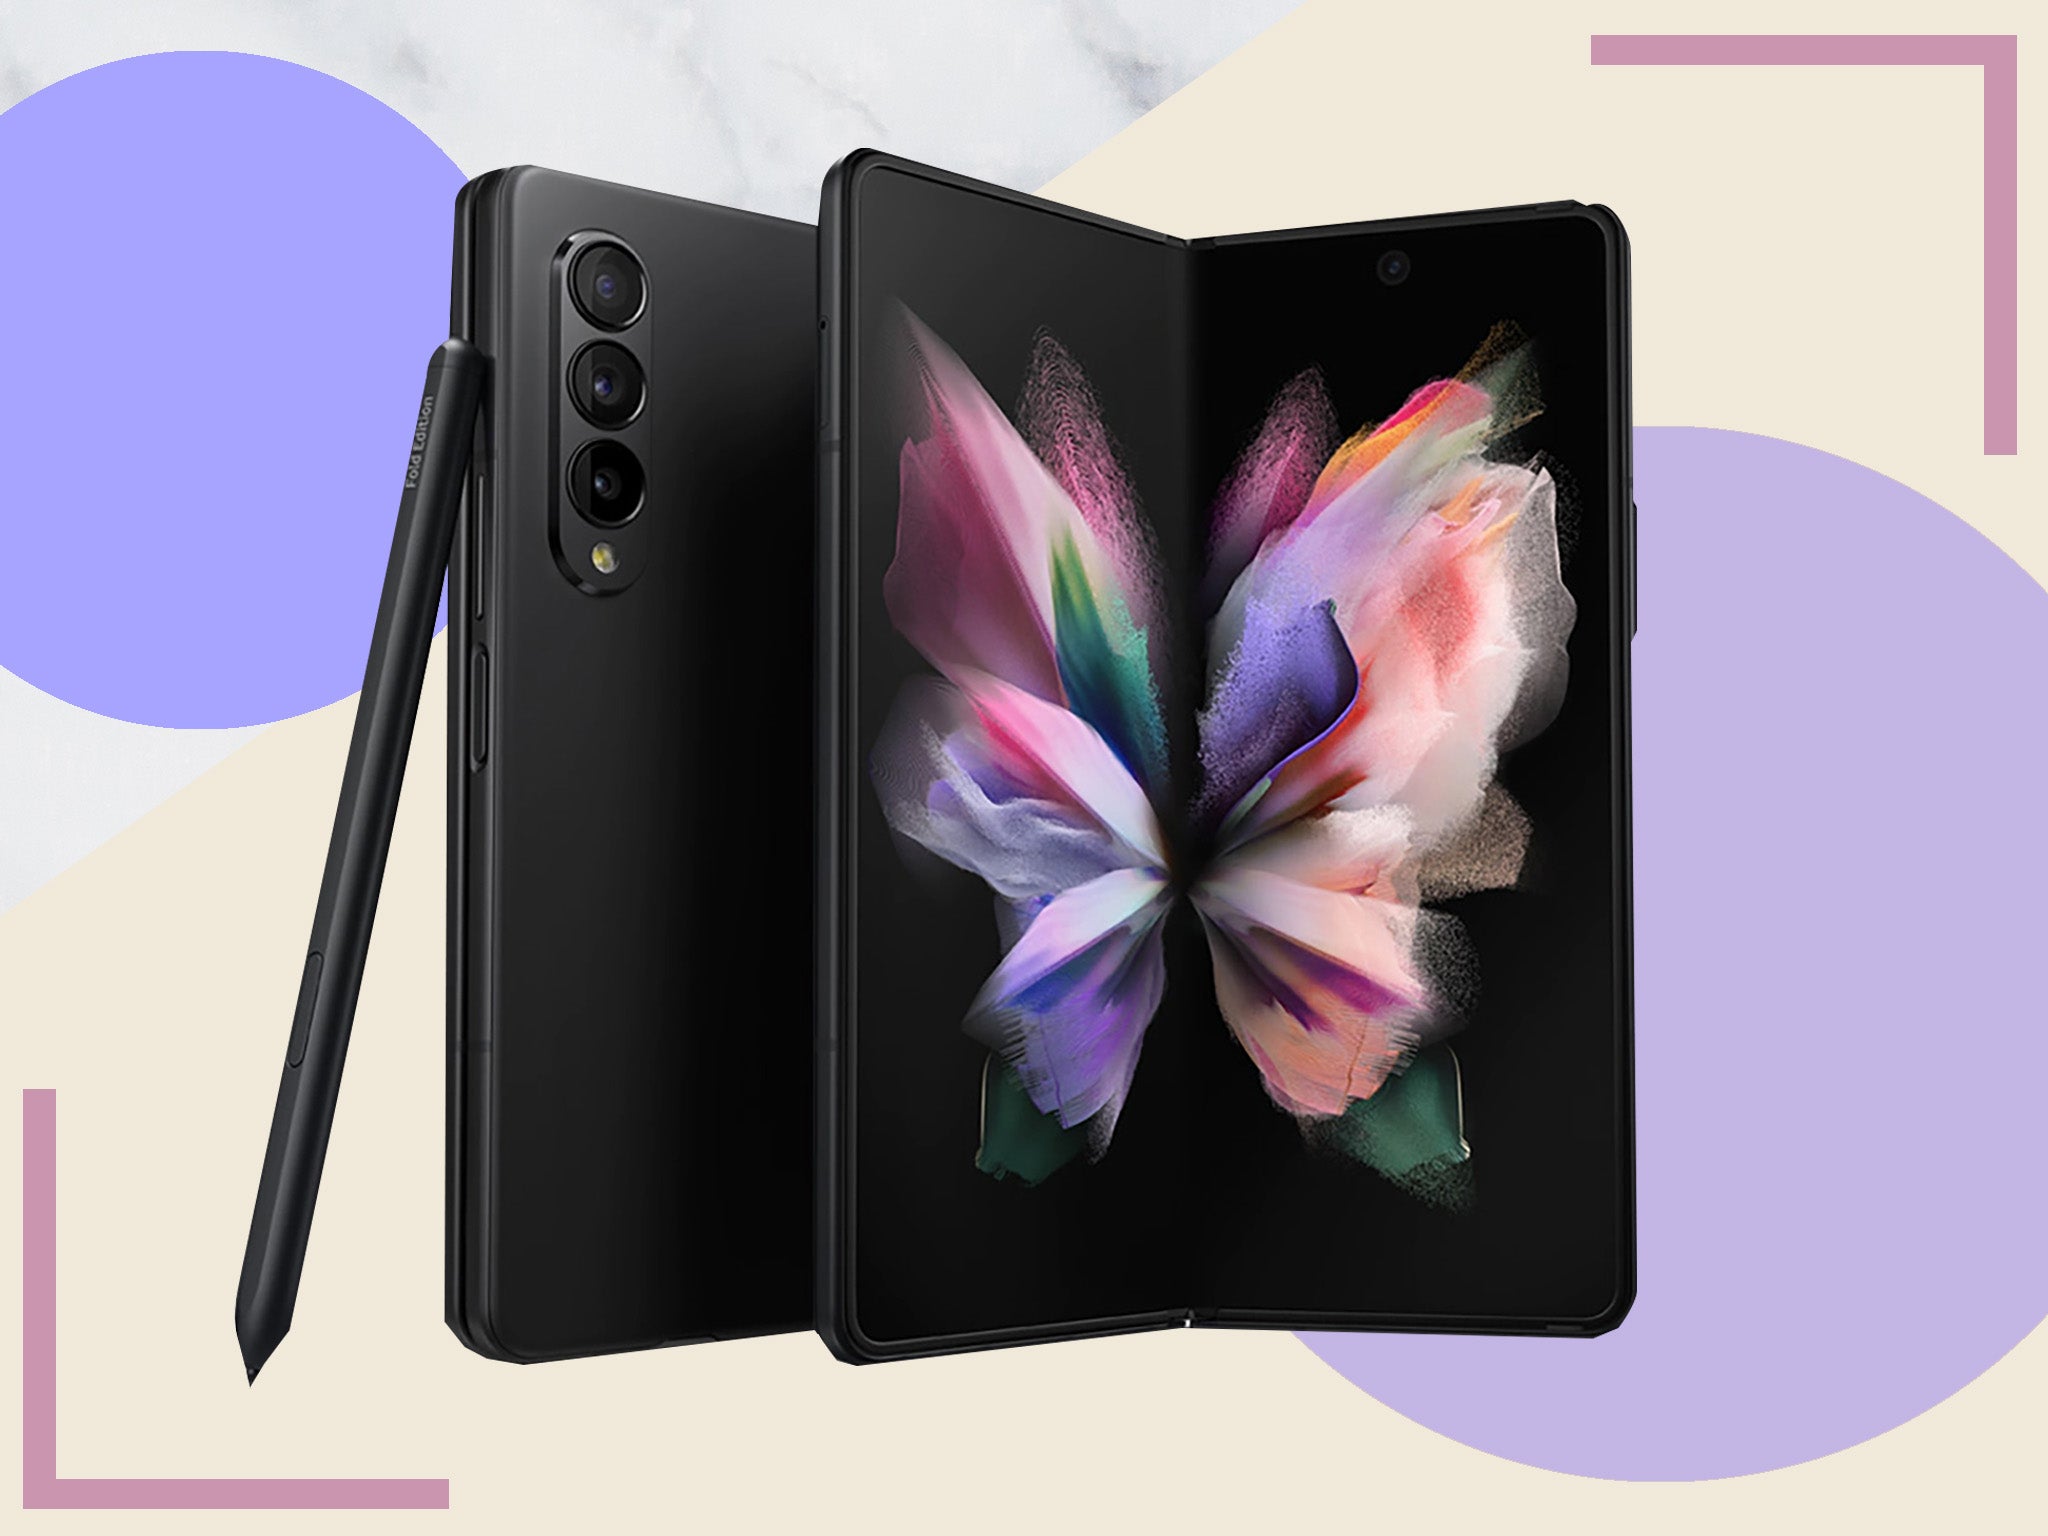 The new and improved Samsung Galaxy Z Fold 3 folds open like a book, boosting two high-quality screens